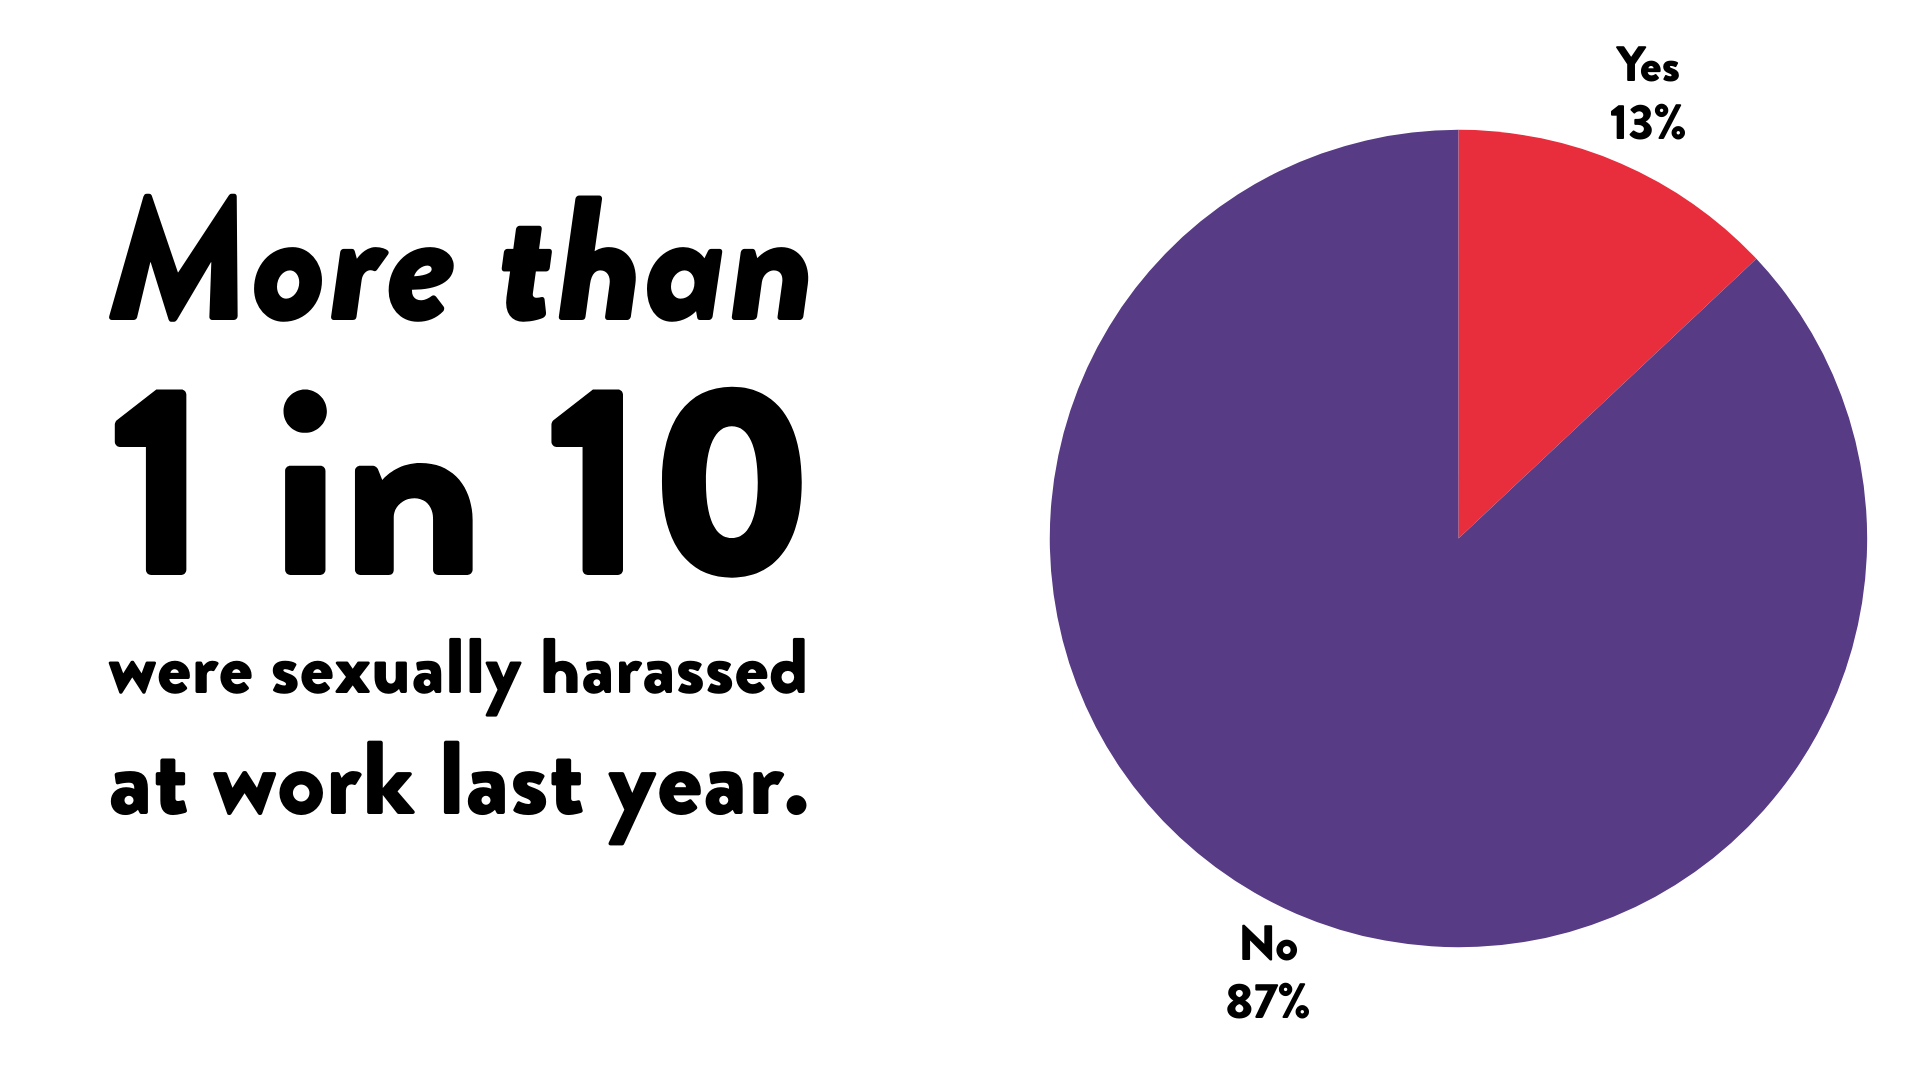 More than 1 in 10 survey respondents were sexually harassed at work last year.